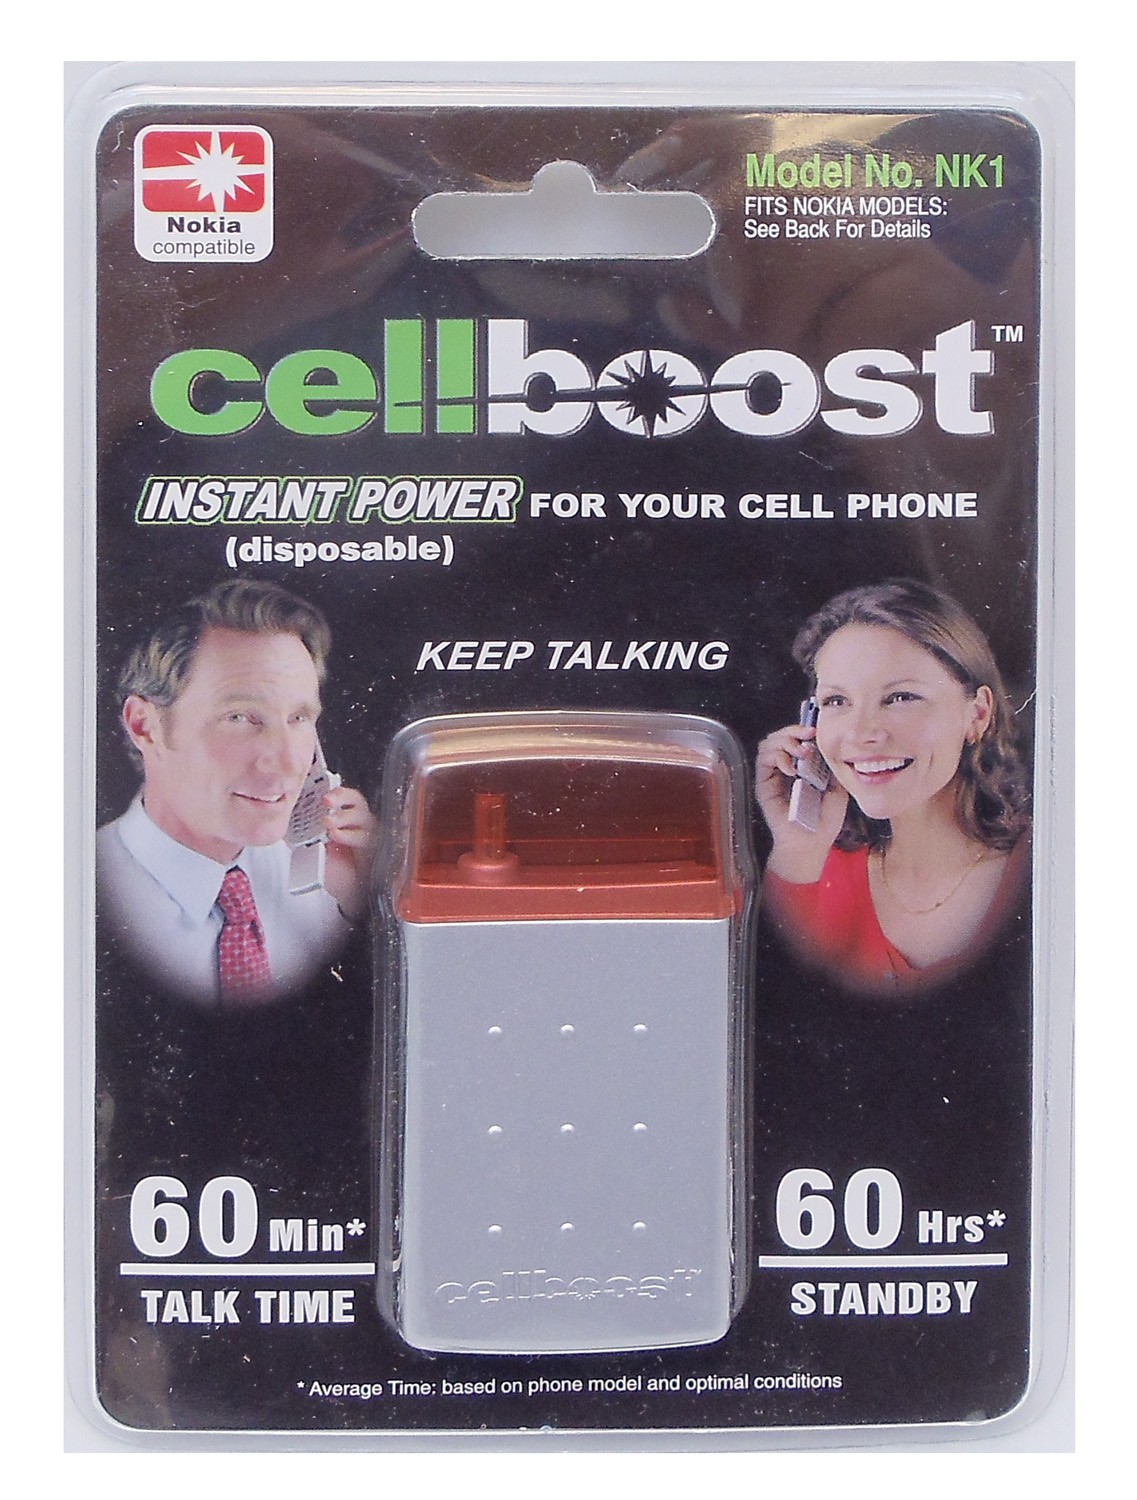 Cellboost - Provides Instant Power Up To 60 Minutes Talk Time & 60 Hours Standby For Most Nokia Phones